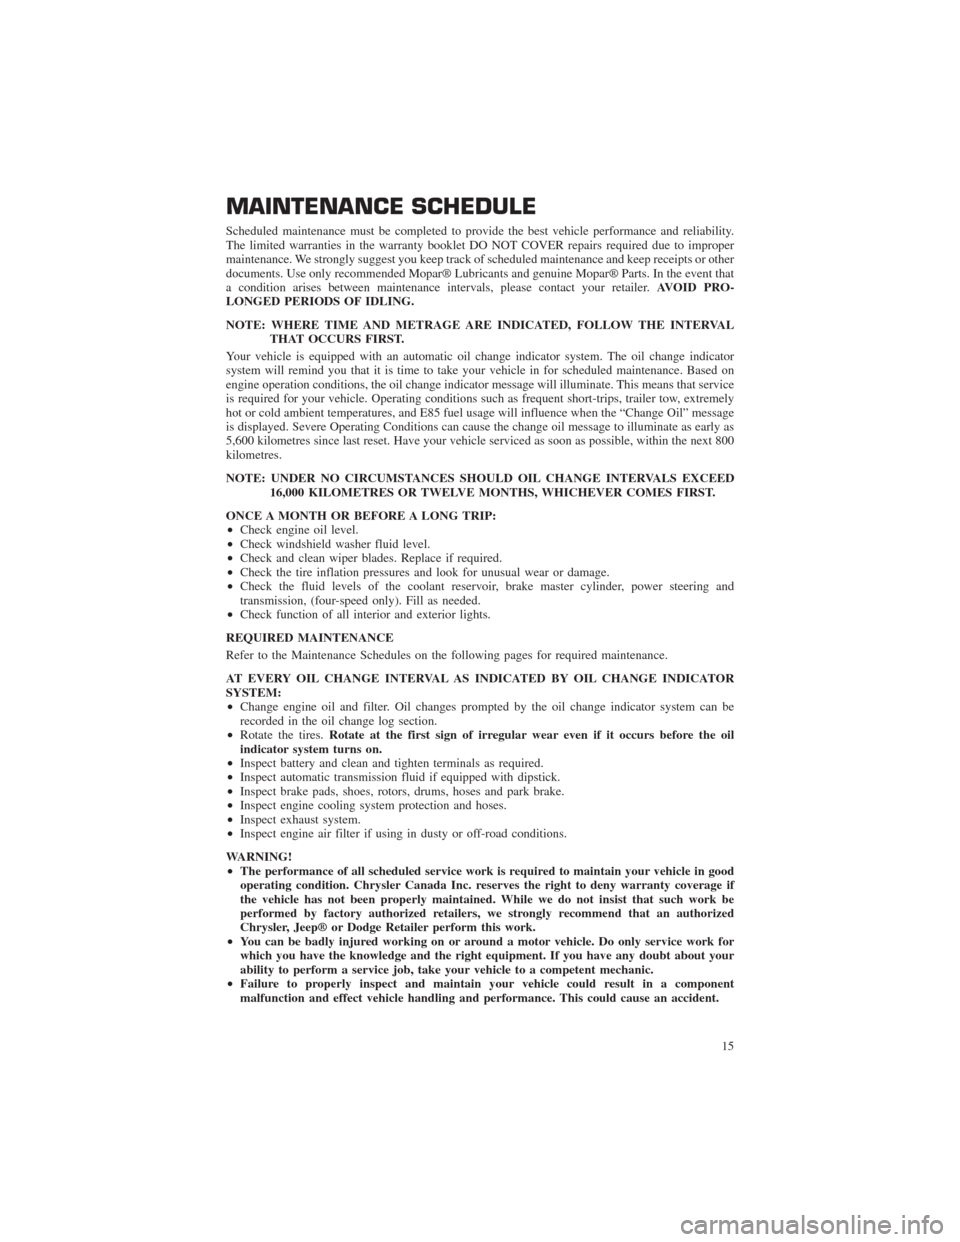 CHRYSLER 200 2014 1.G Warranty Booklet MAINTENANCE SCHEDULE
Scheduled maintenance must be completed to provide the best vehicle performance and reliability.
The limited warranties in the warranty booklet DO NOT COVER repairs required due t